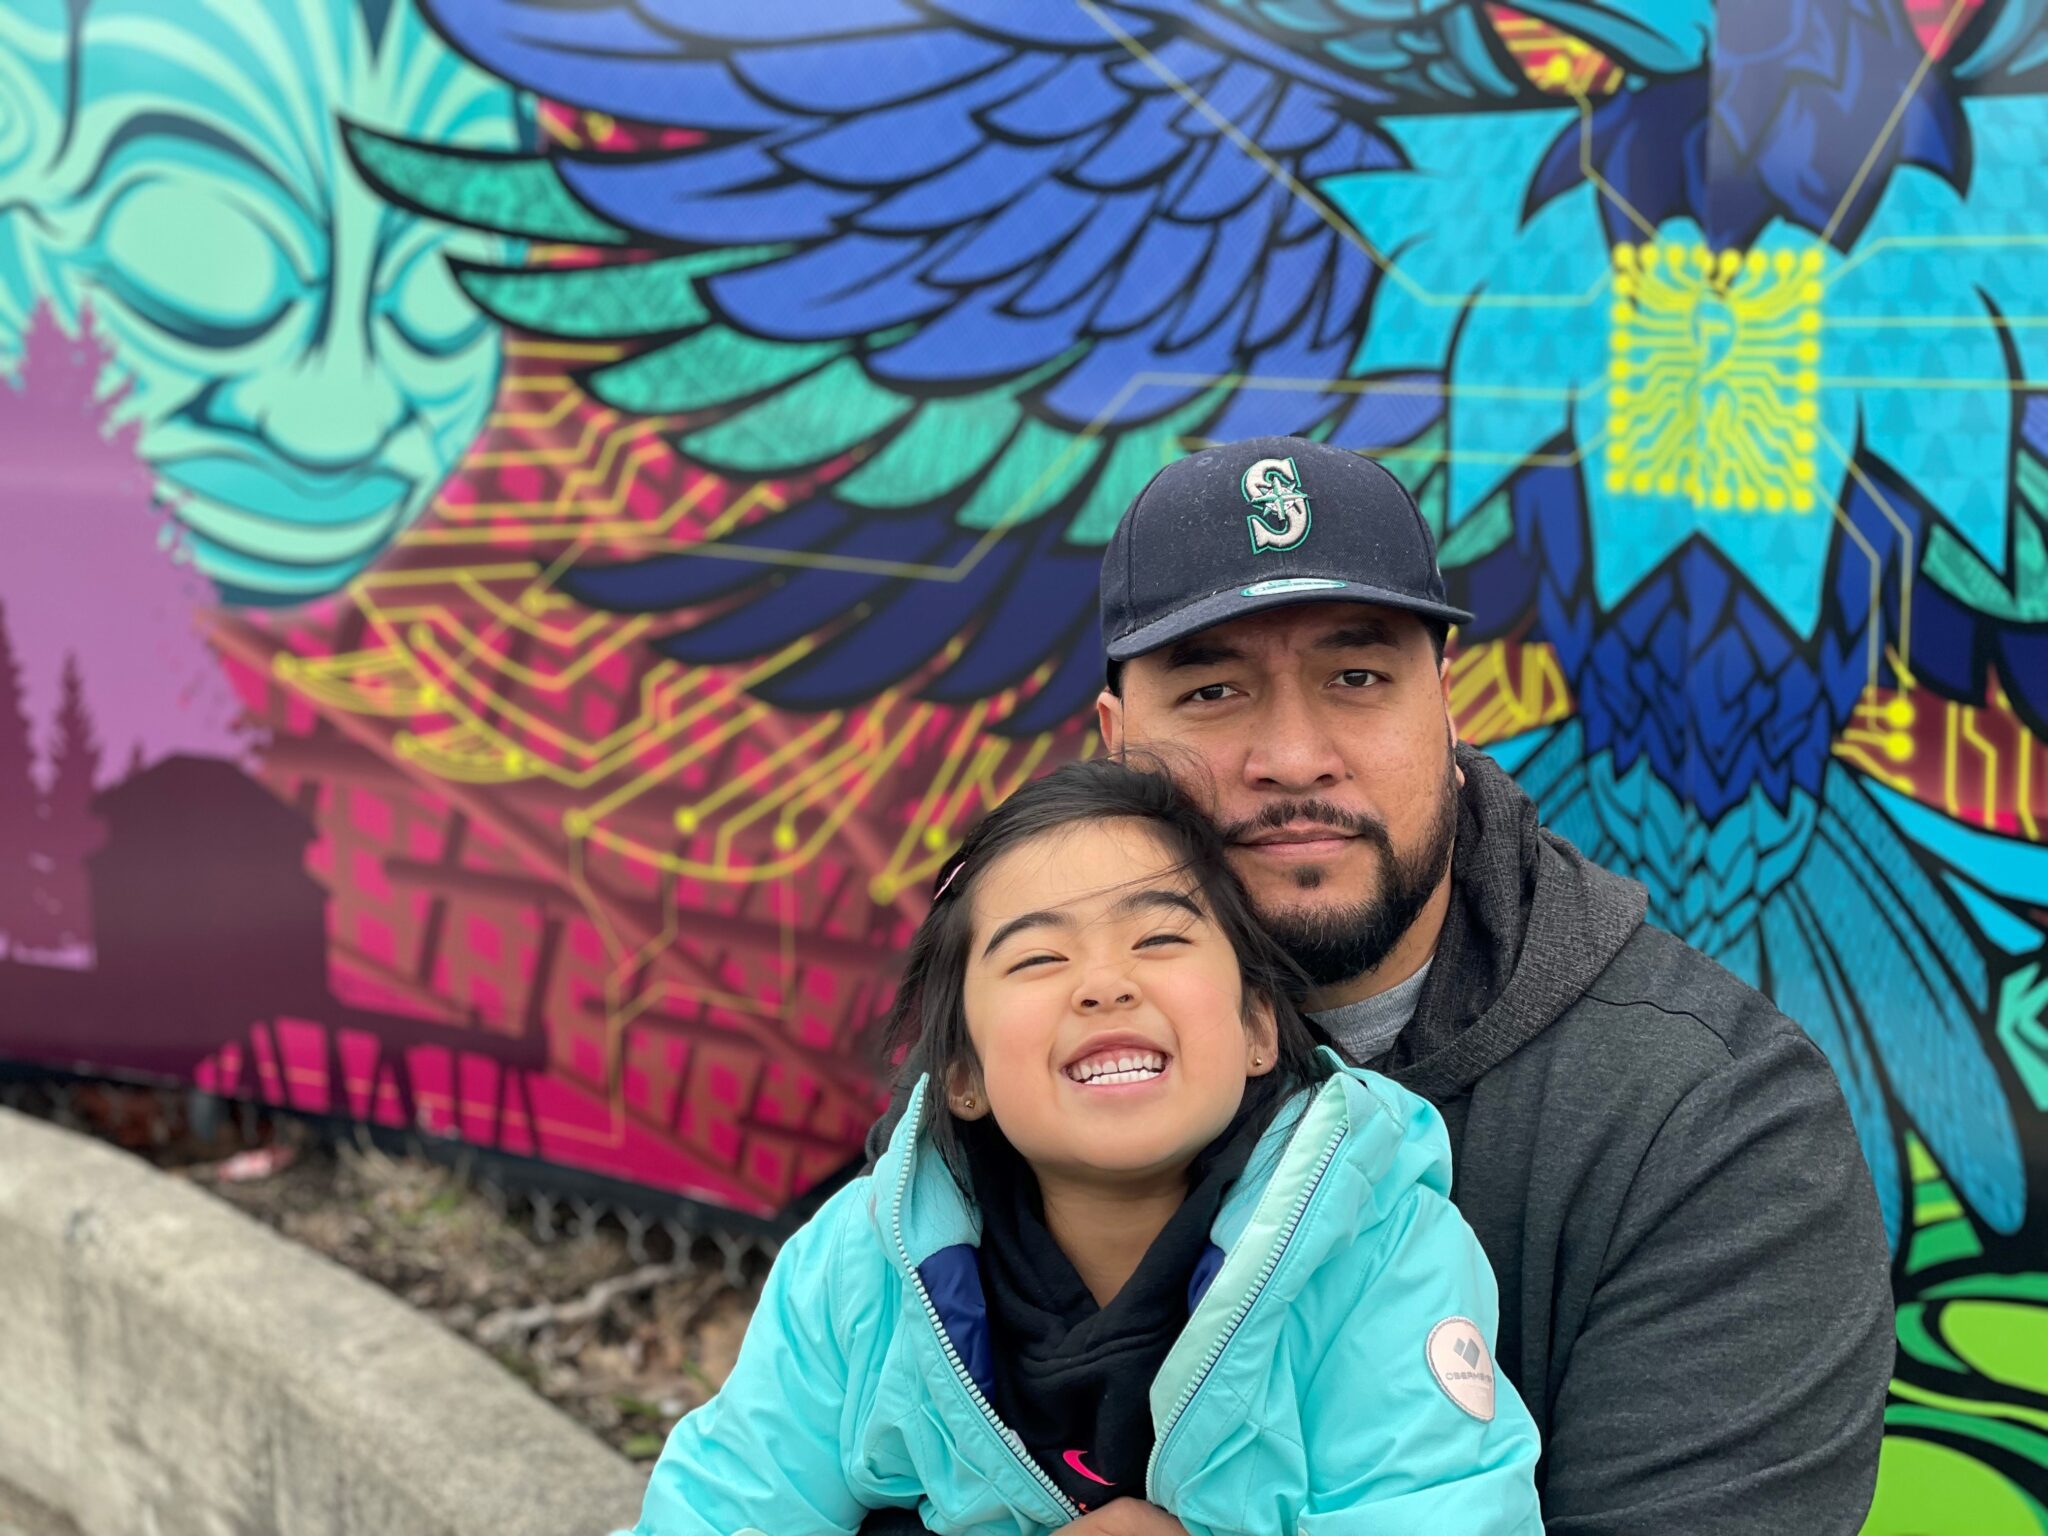 Artist Toka Valu with his daughter in front of a colorful mural